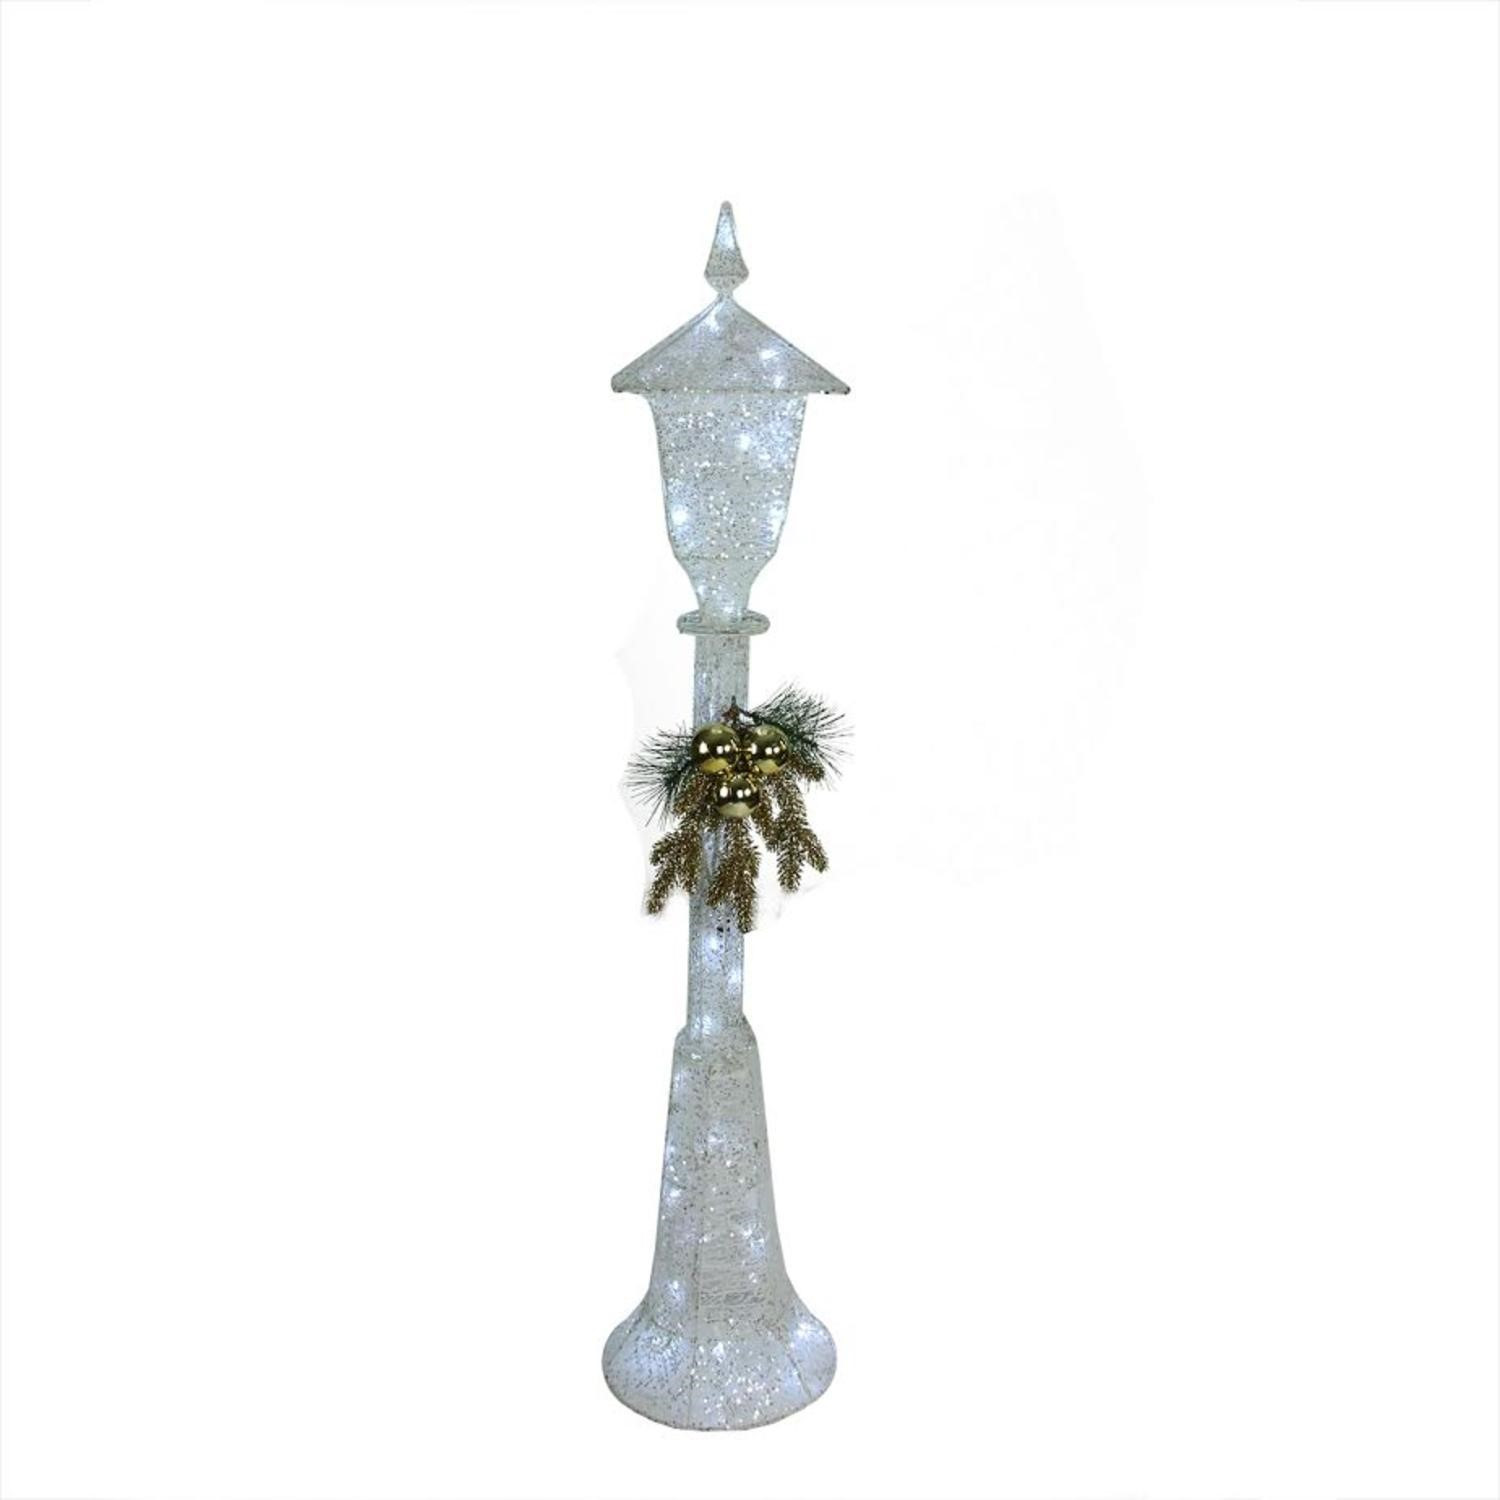 Outdoor Christmas Lamp Post Decoration
 48” LED Lighted Indoor Outdoor Lamp Post Christmas